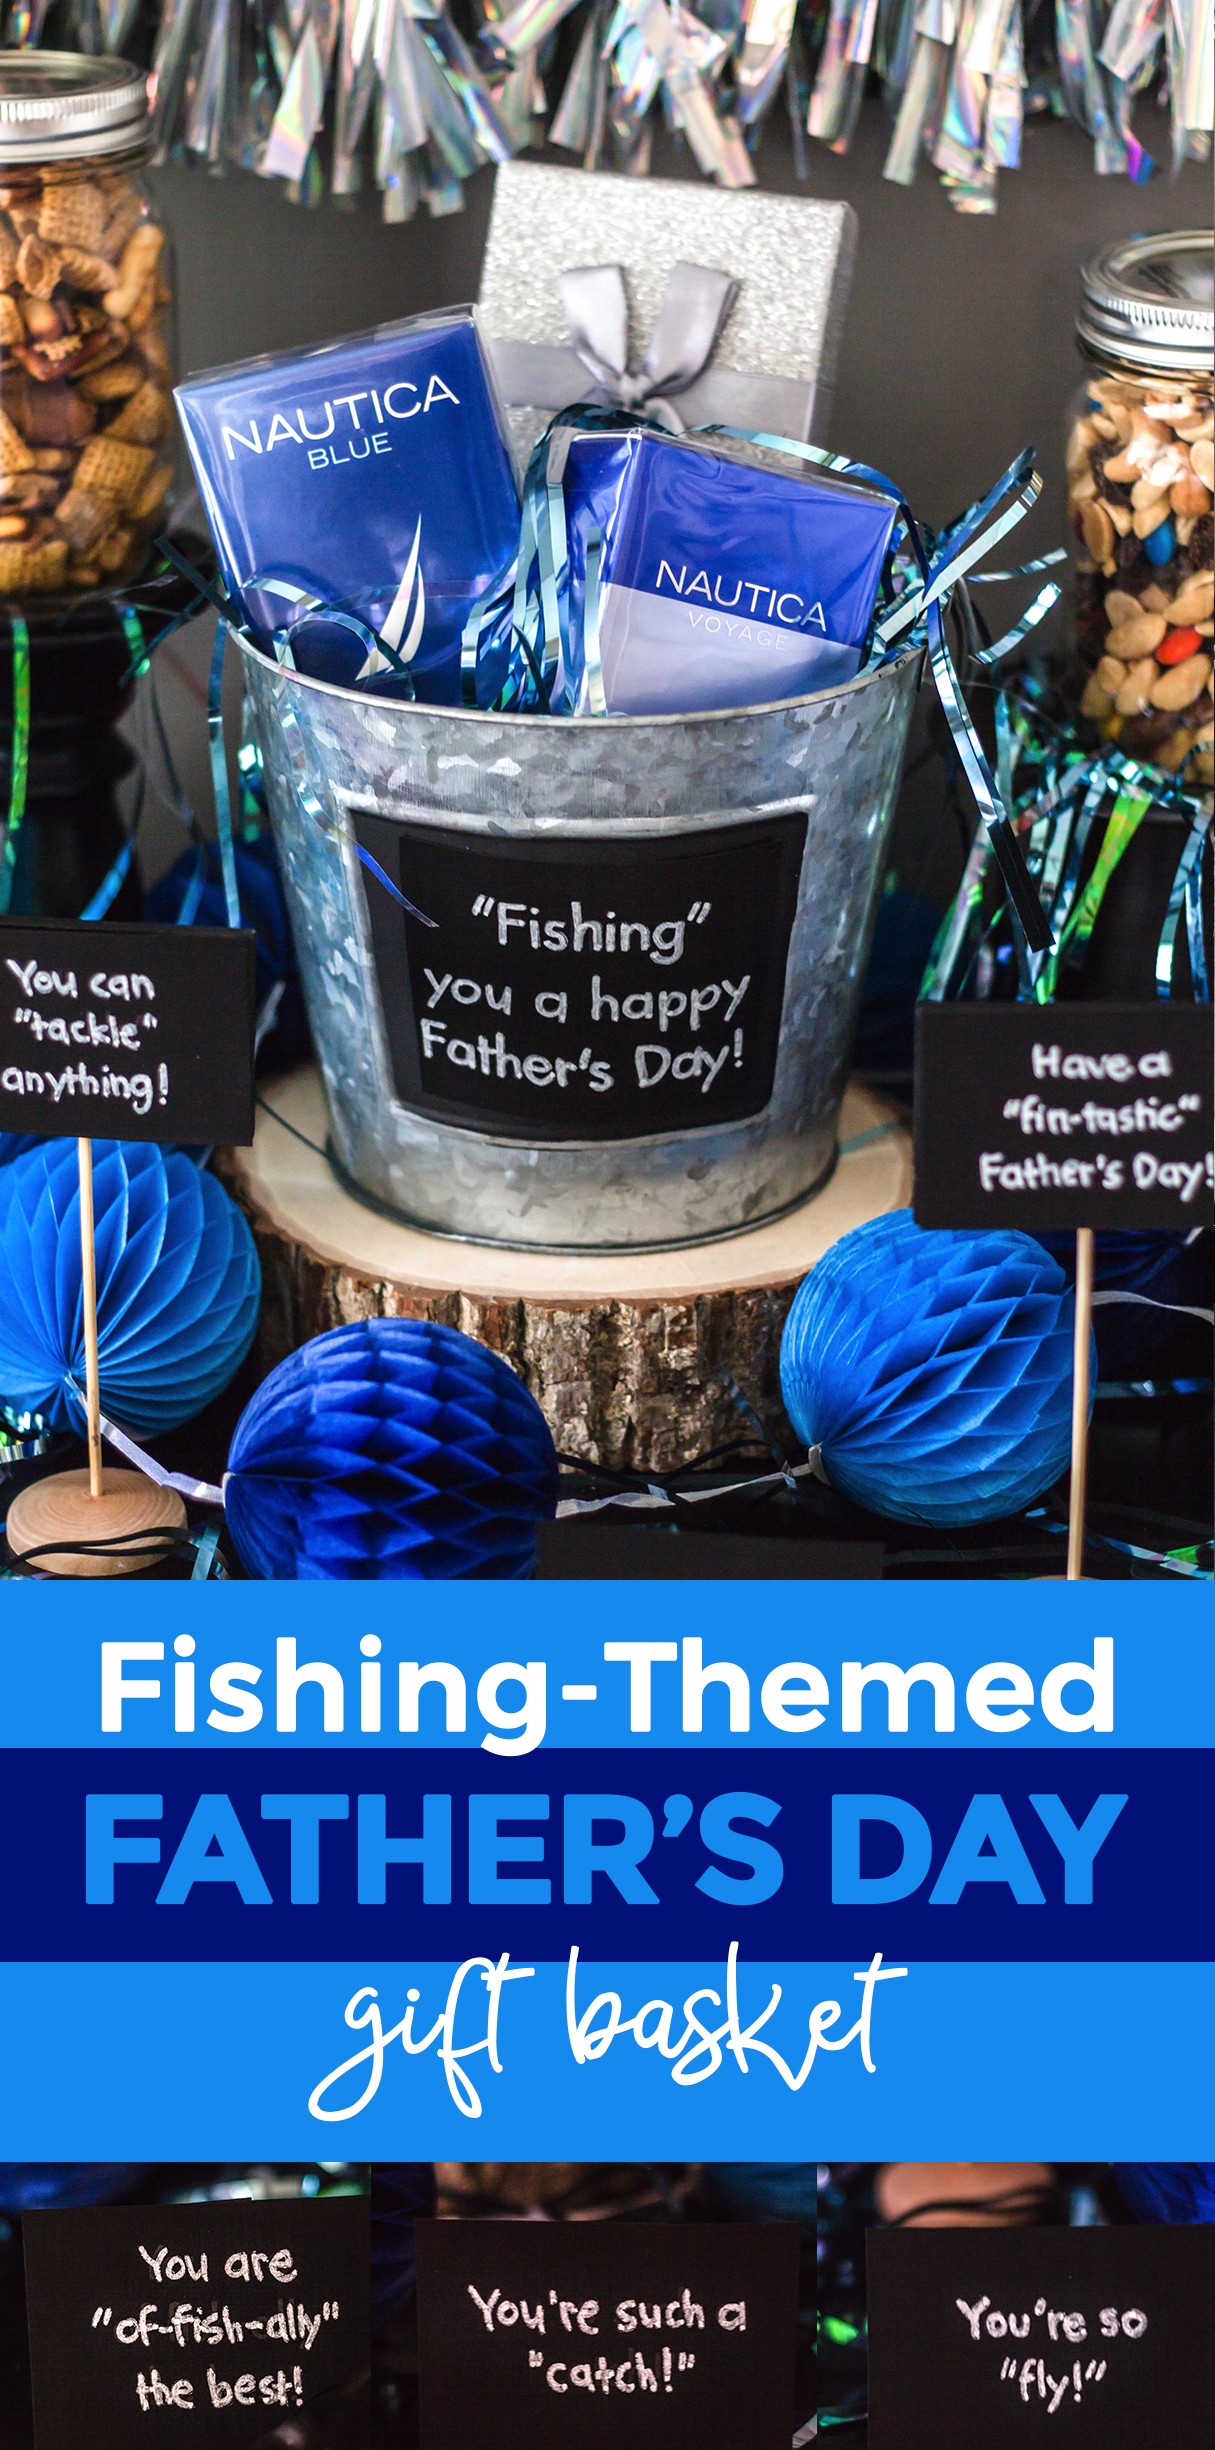 https://thediylighthouse.com/wp-content/uploads/2019/05/Fishing-Themed-Fathers-Day-Gift-Basket-pinterest.jpg